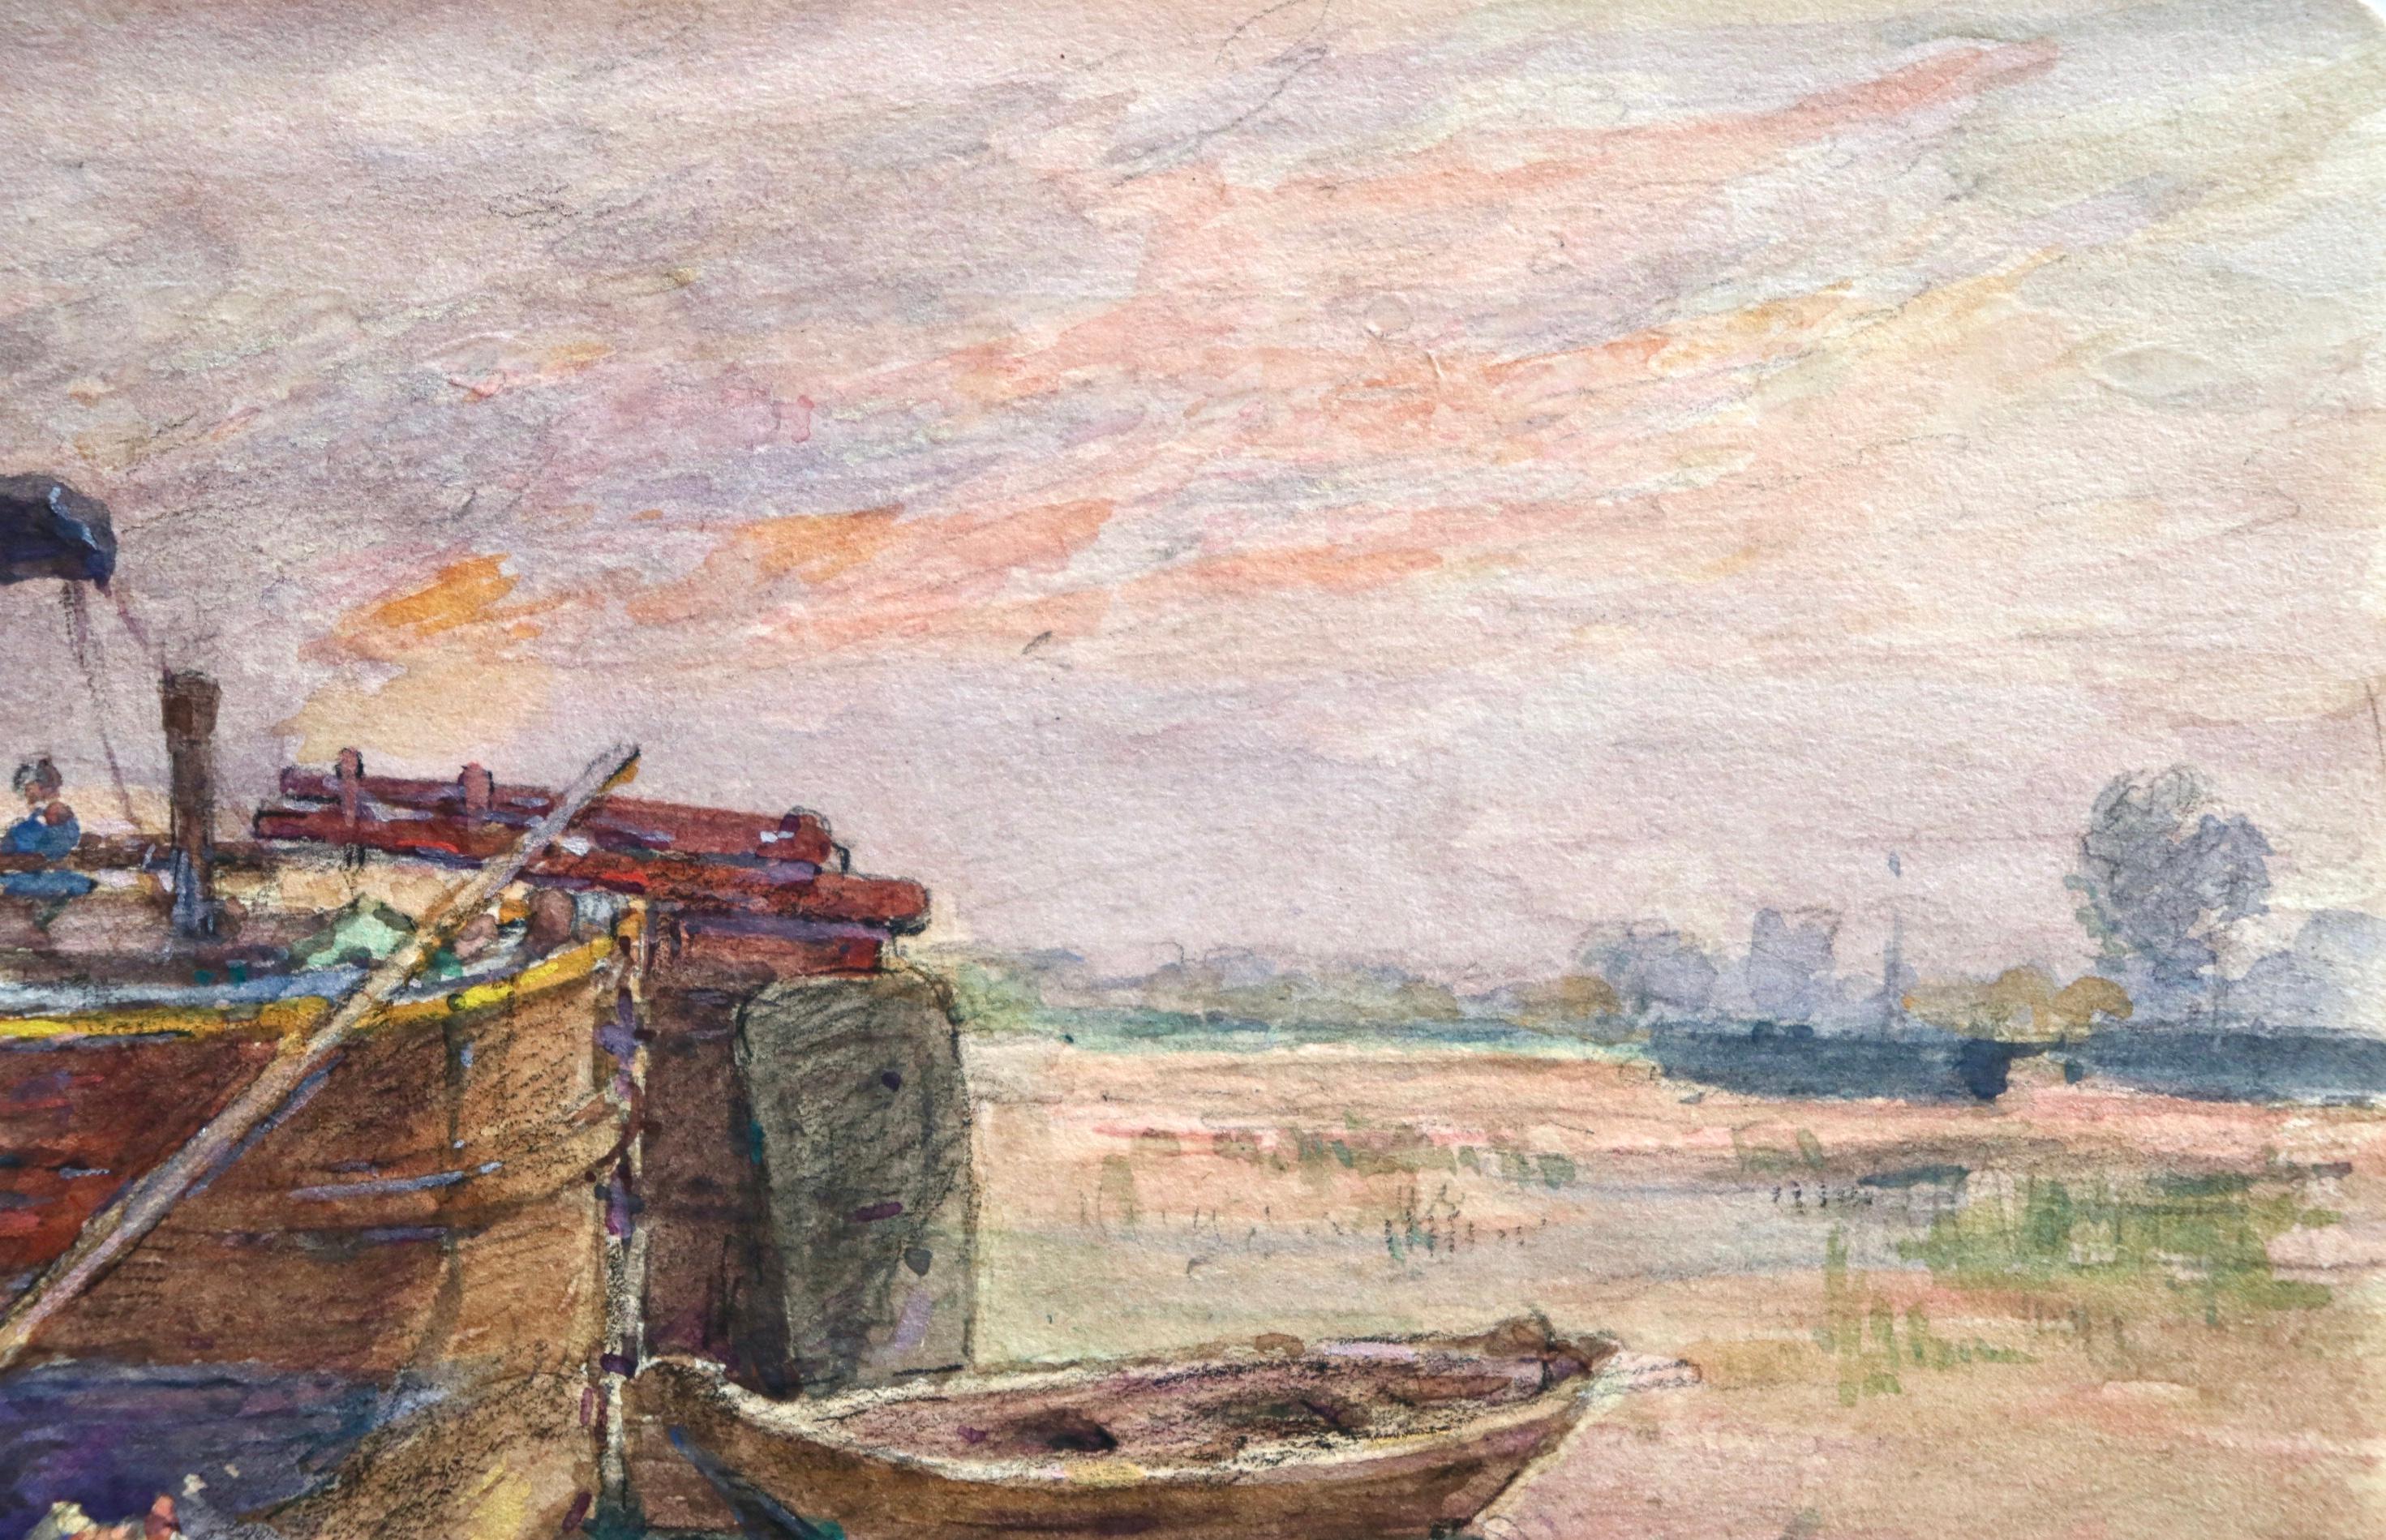 Fishing boat at sunset - Impressionist Watercolour, Boat in Riverscape - H Duhem 2